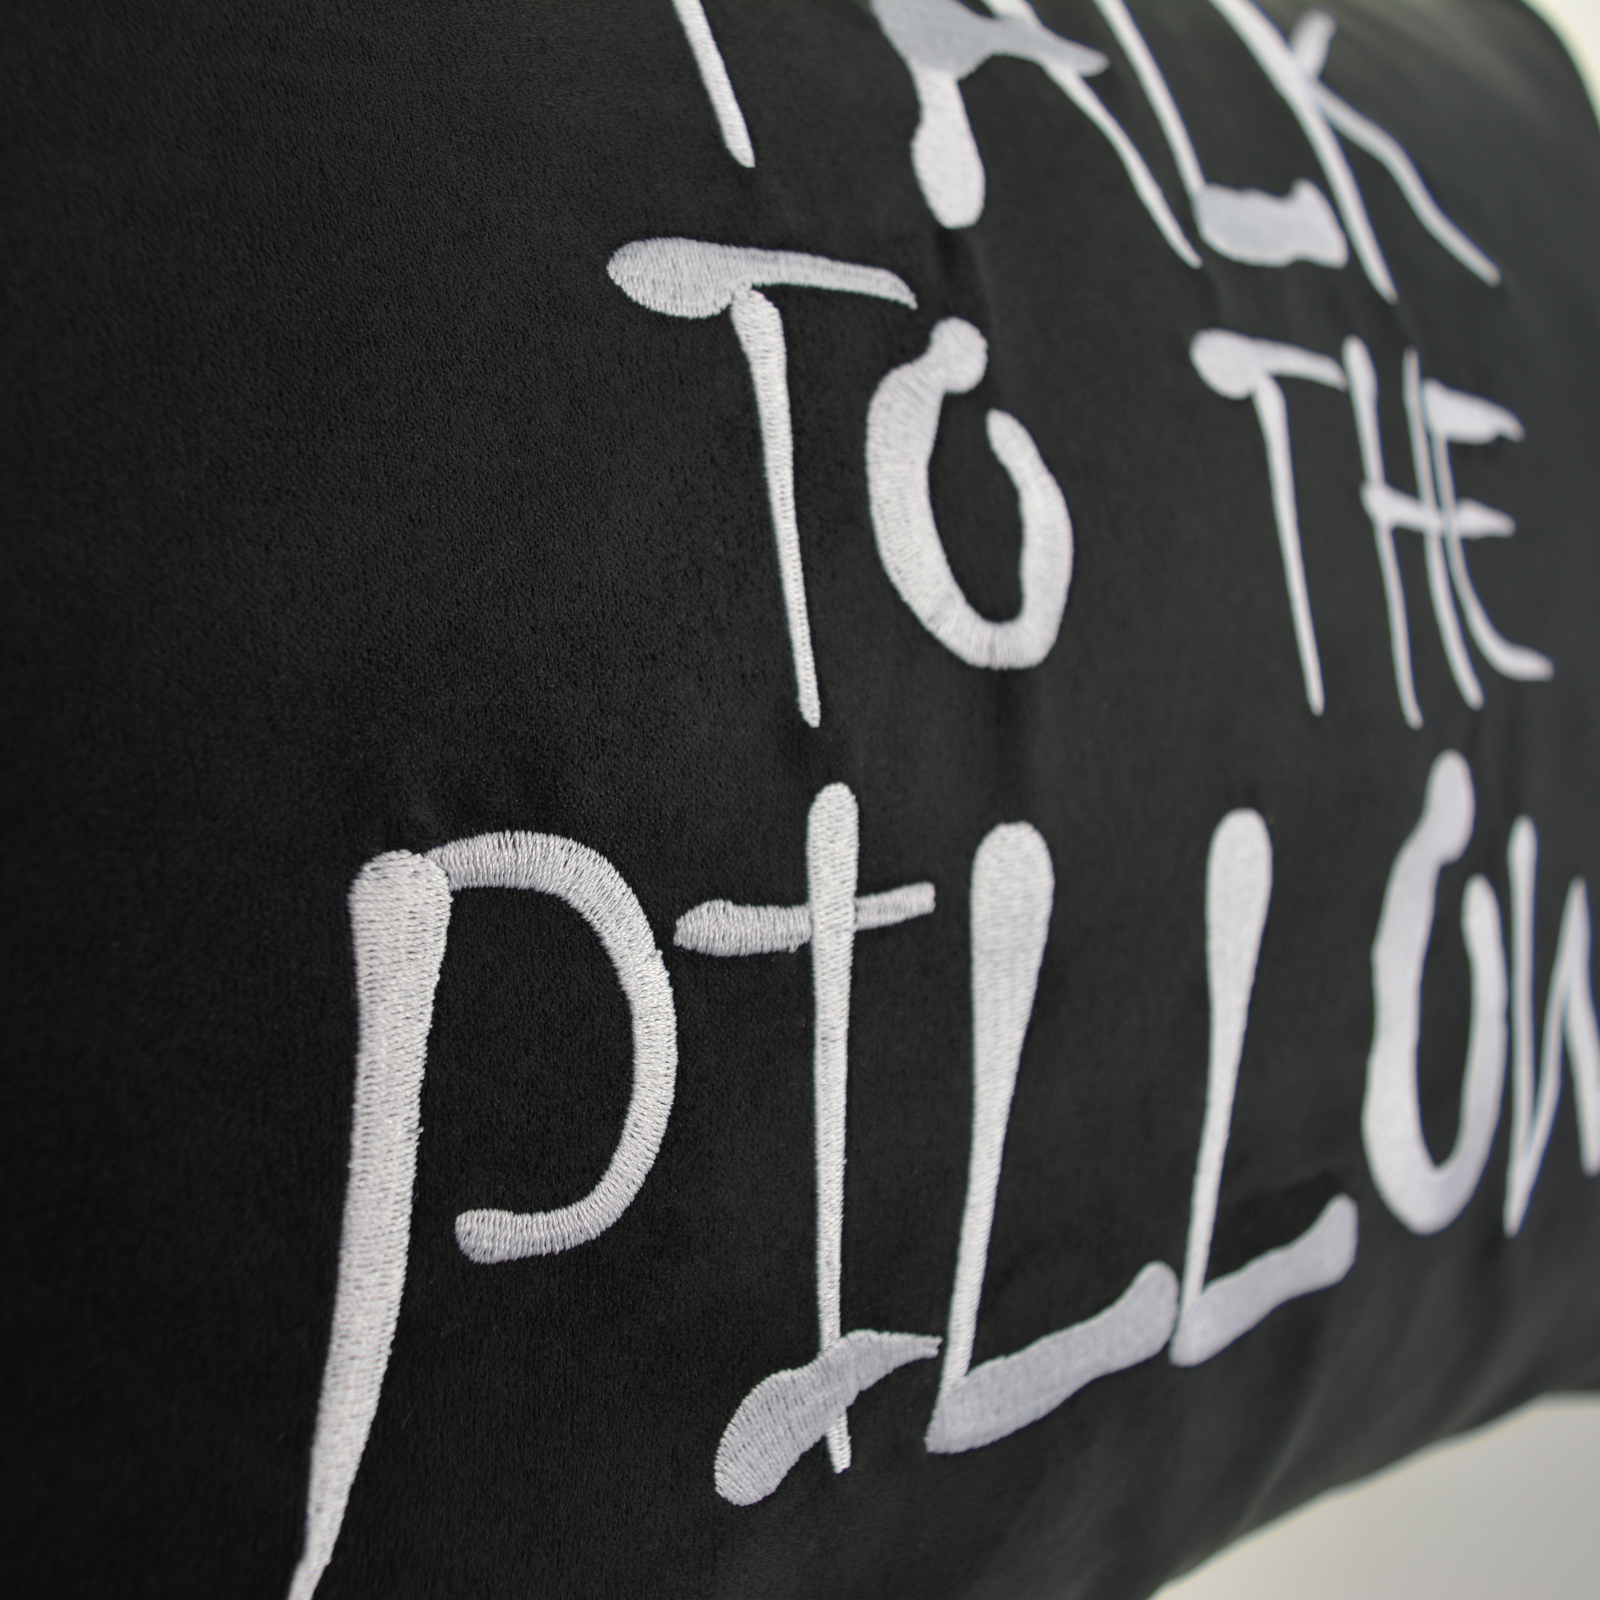 Talk to the Pillow